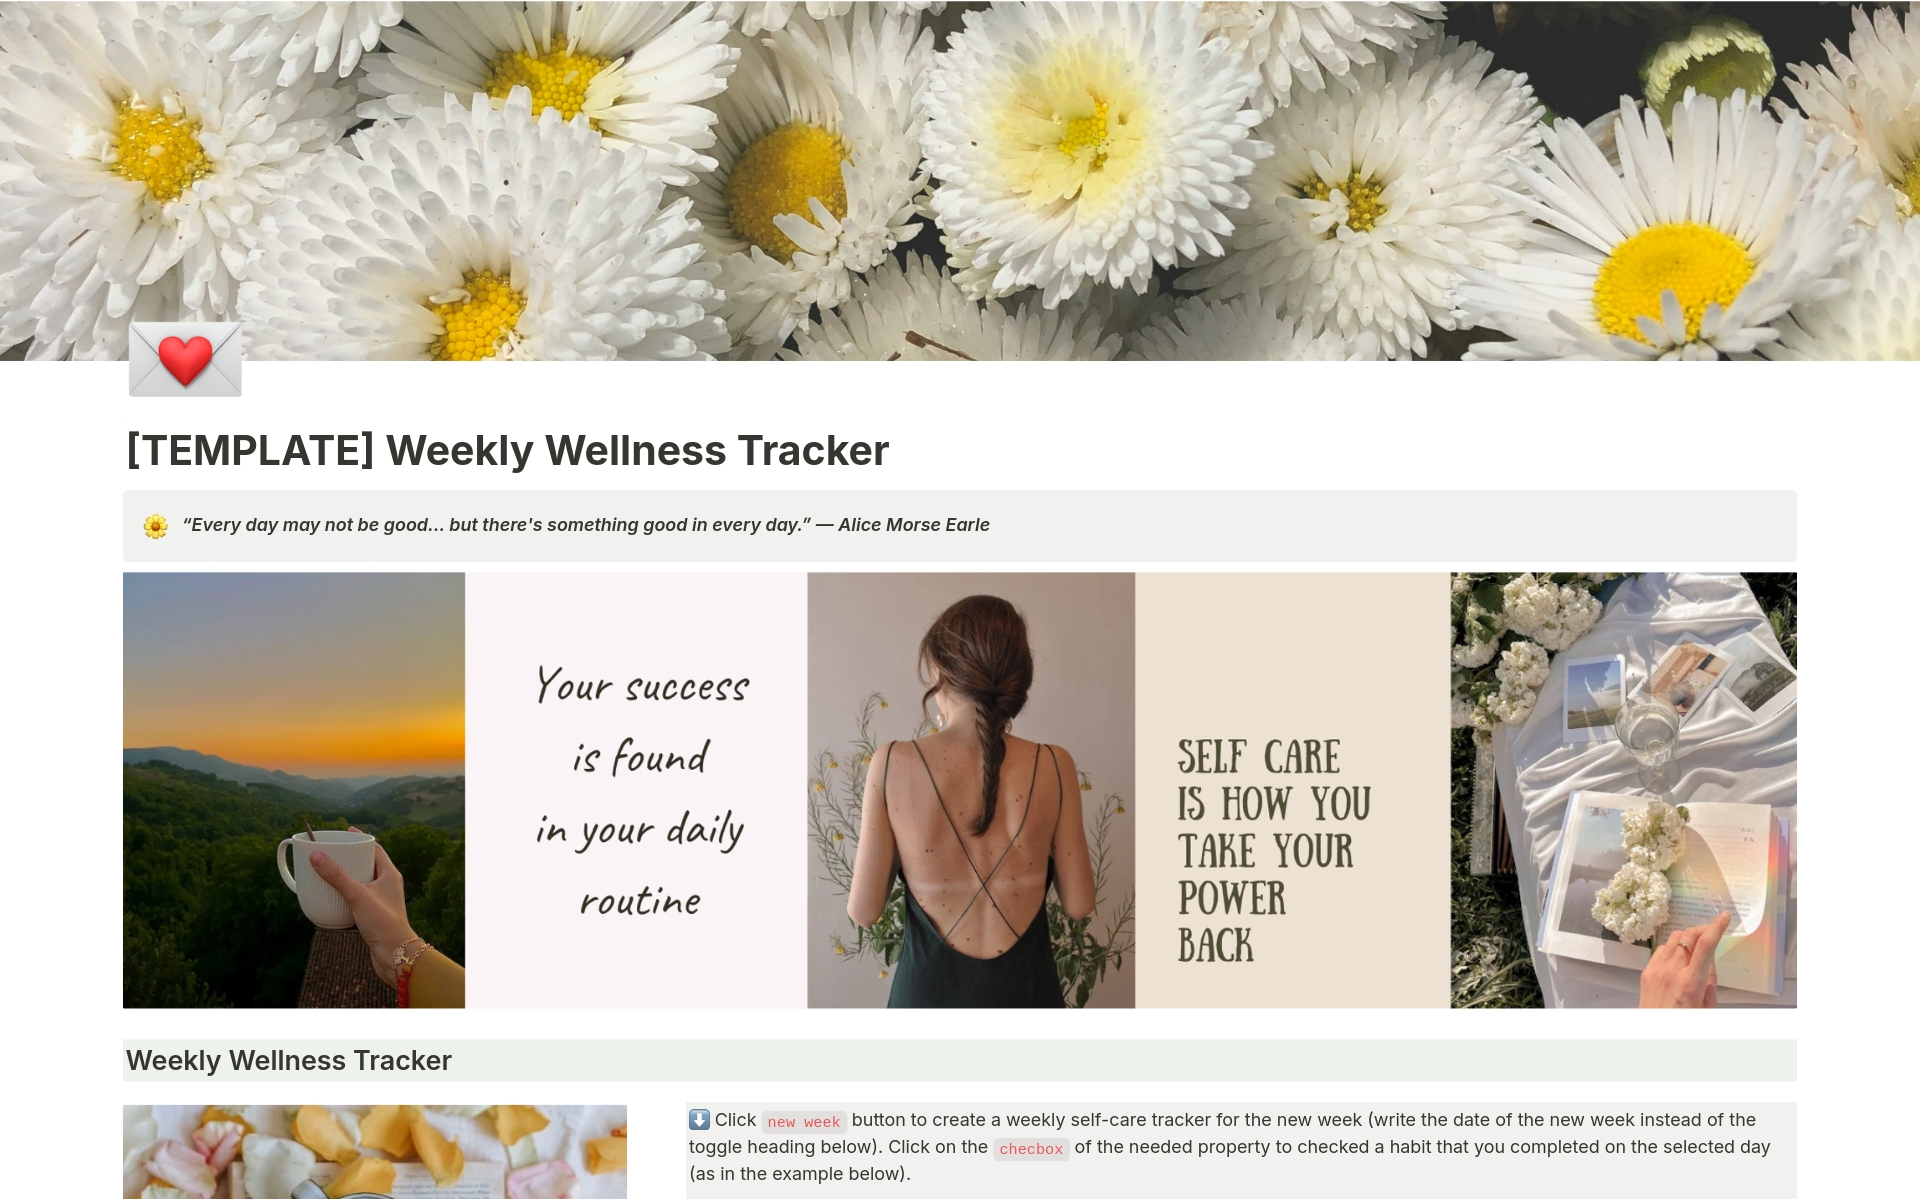 🌼 Keep your self-care journey on track with Weekly Wellness Tracker. Monitor your progress, set achievable goals, and celebrate your victories along the way.